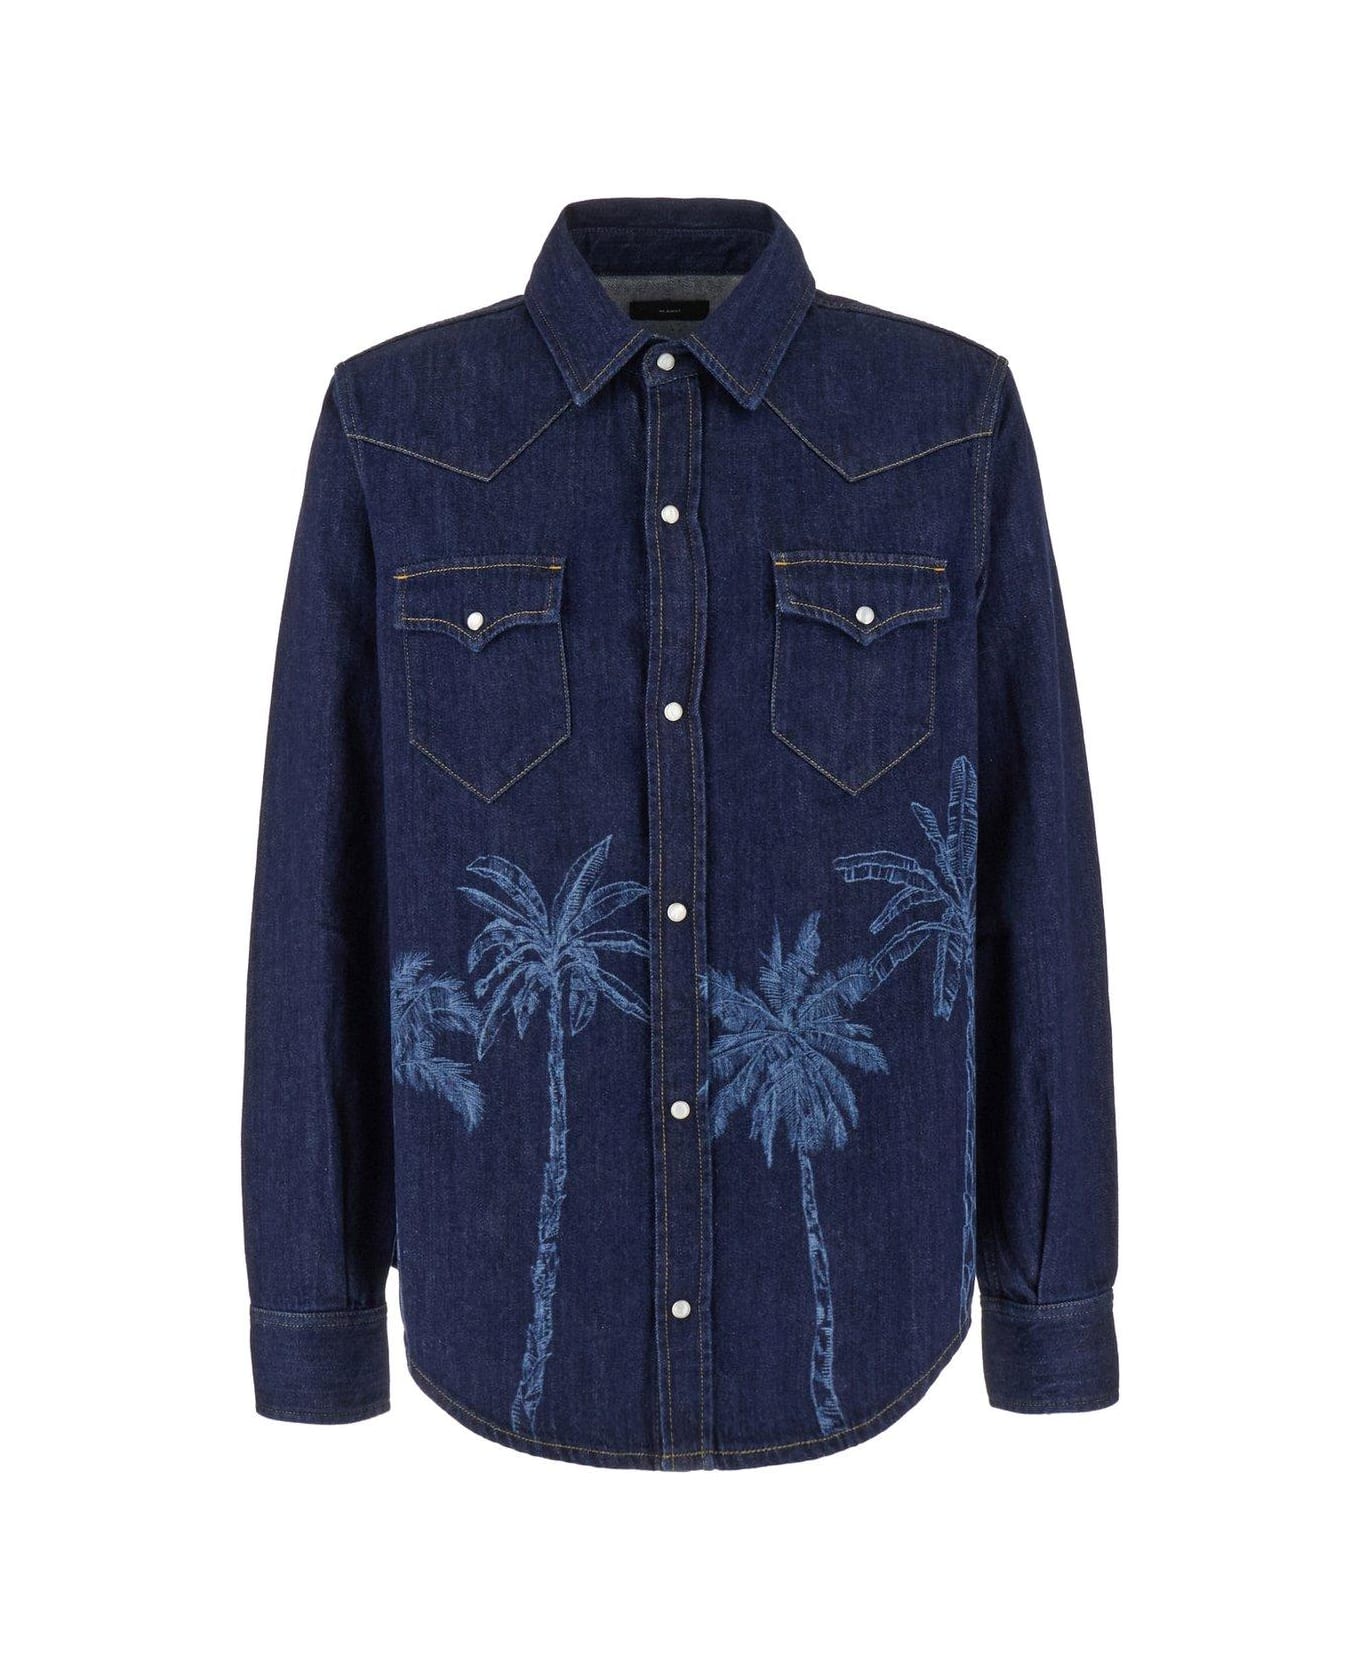 Alanui Graphic Printed Buttoned Shirt - BLUE シャツ